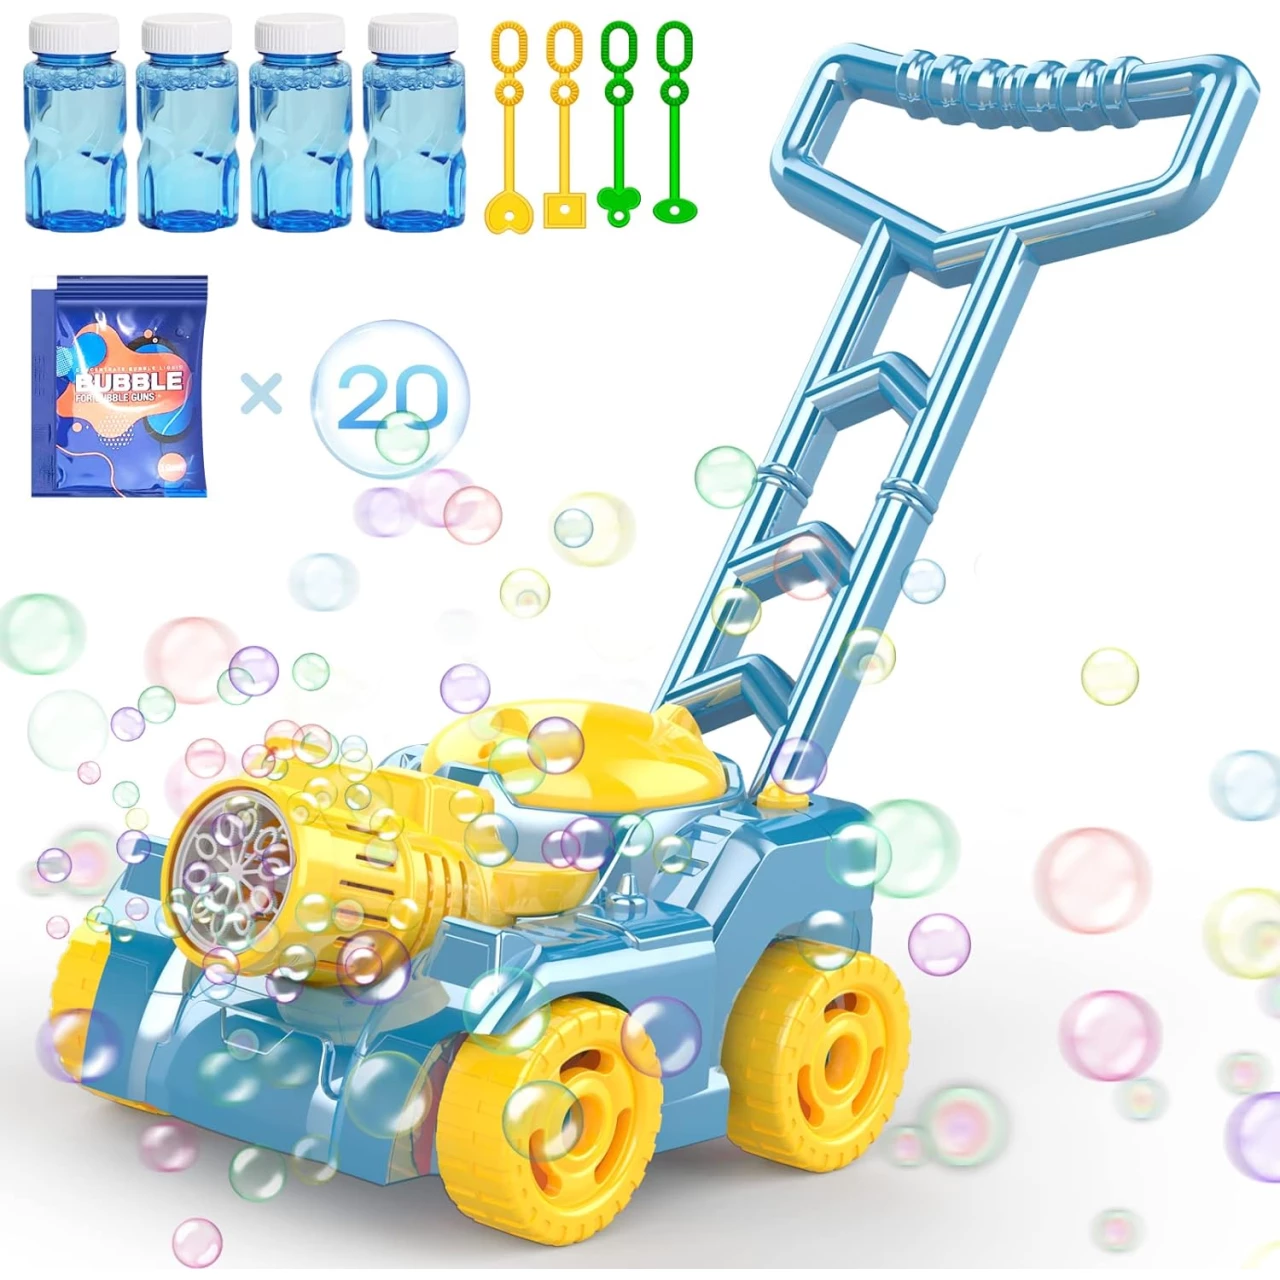 Bubble Machine,Bubble Blower Maker,Bubble Lawn Mower for Toddlers 1-3,Summer Outdoor Push Backyard Gardening Toys,Wedding Party Favors,Christmas Birthday Gifts for Preschool Baby Boys Girls